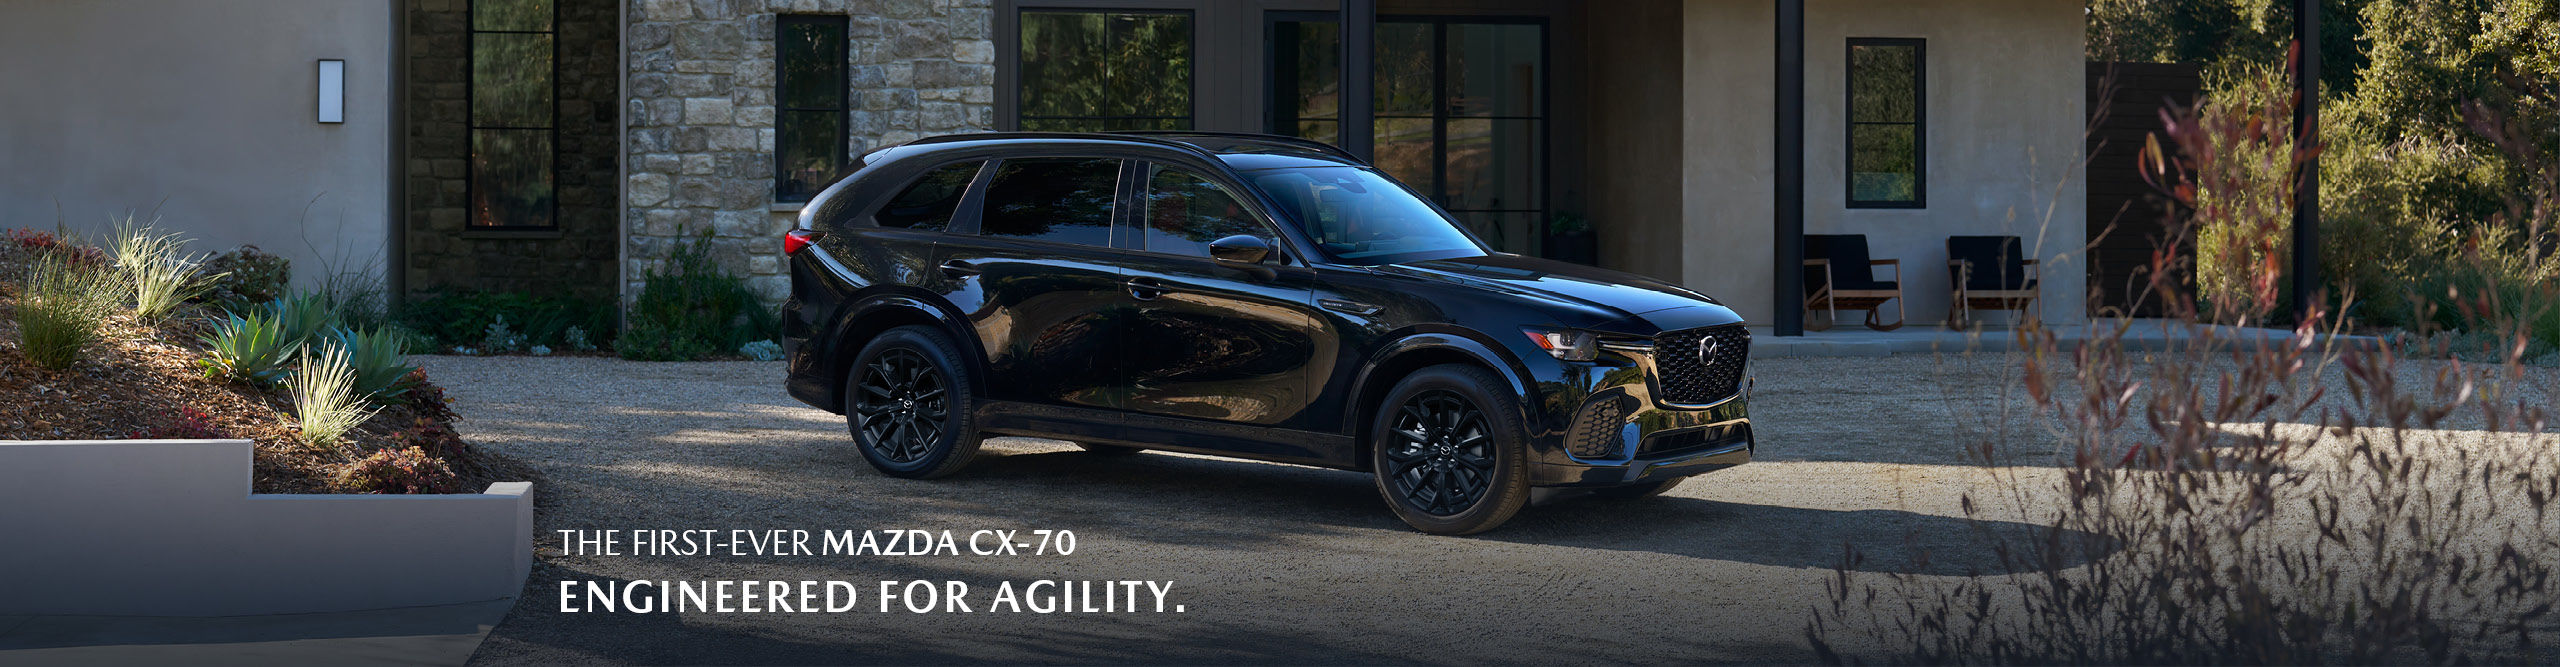 The first-ever Mazda CX-70. ENGINEERED FOR AGILITY.